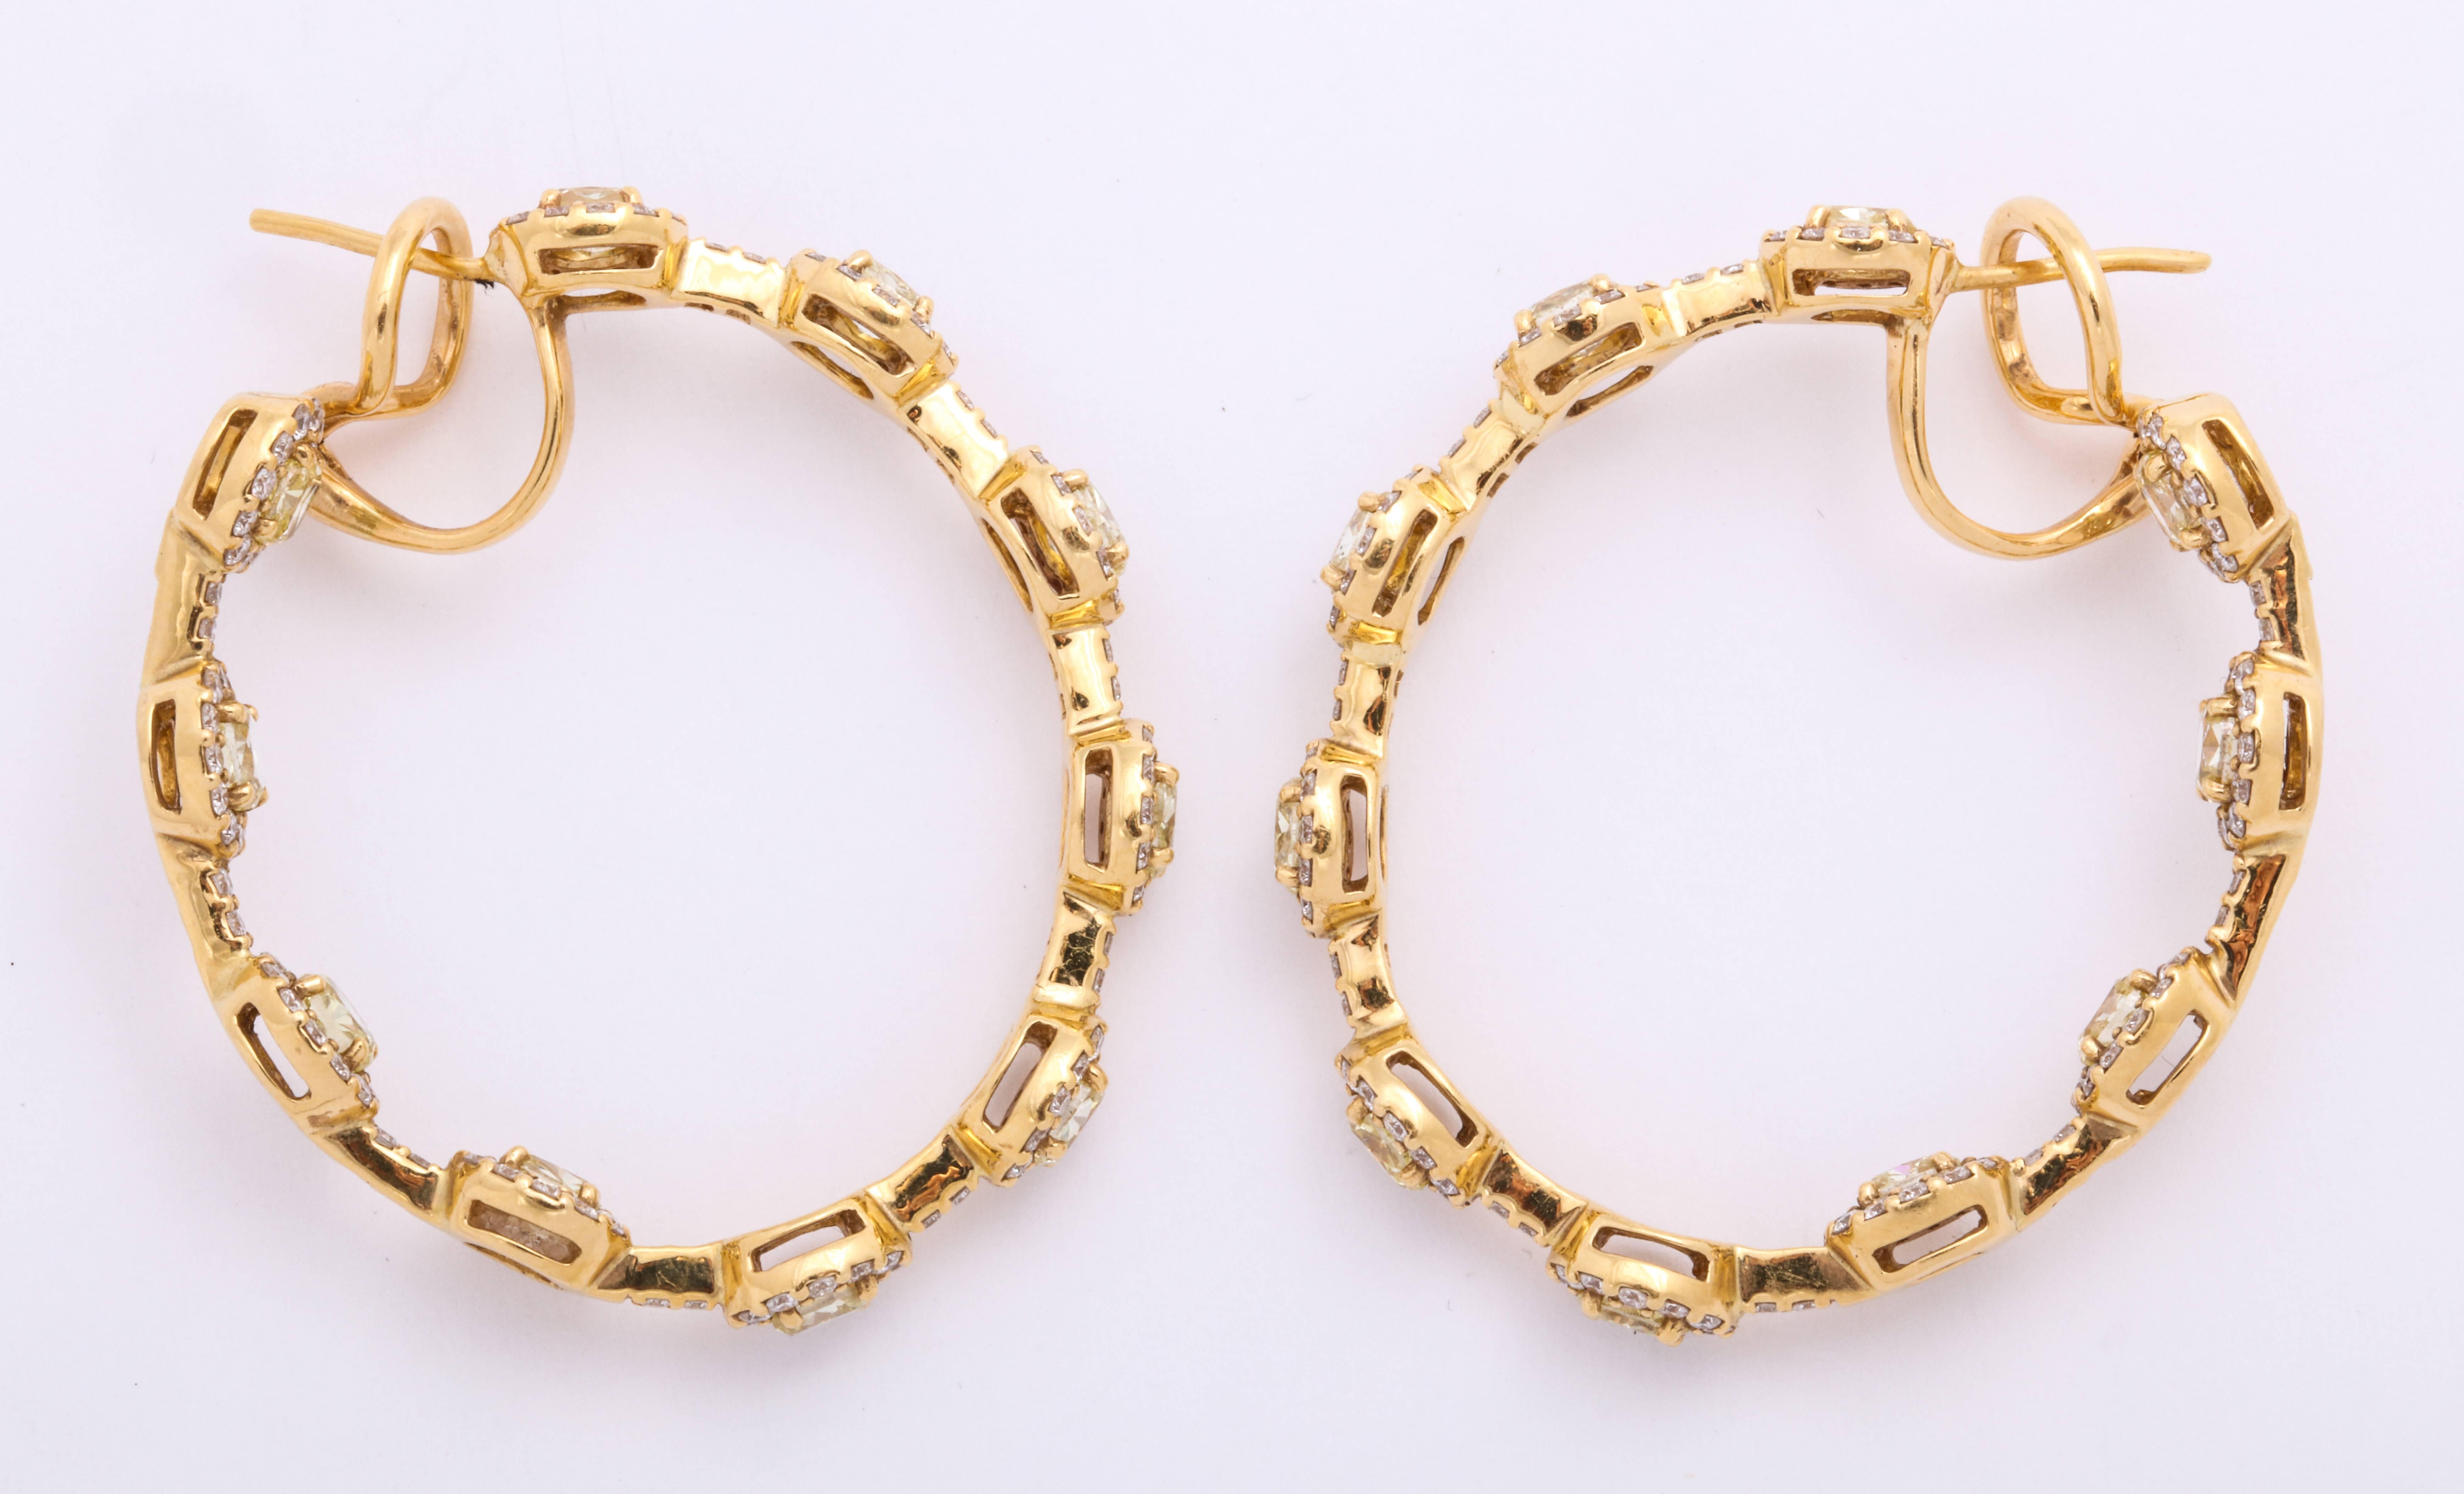 Contemporary stylized 18 Karat yellow gold hoop earrings decorated with colorless round brilliant-cut diamonds: 2.42 carats, mounted with 20 evenly spaced natural color yellow oval diamond stations, total weight: 4.68 carats. For pierced ears with